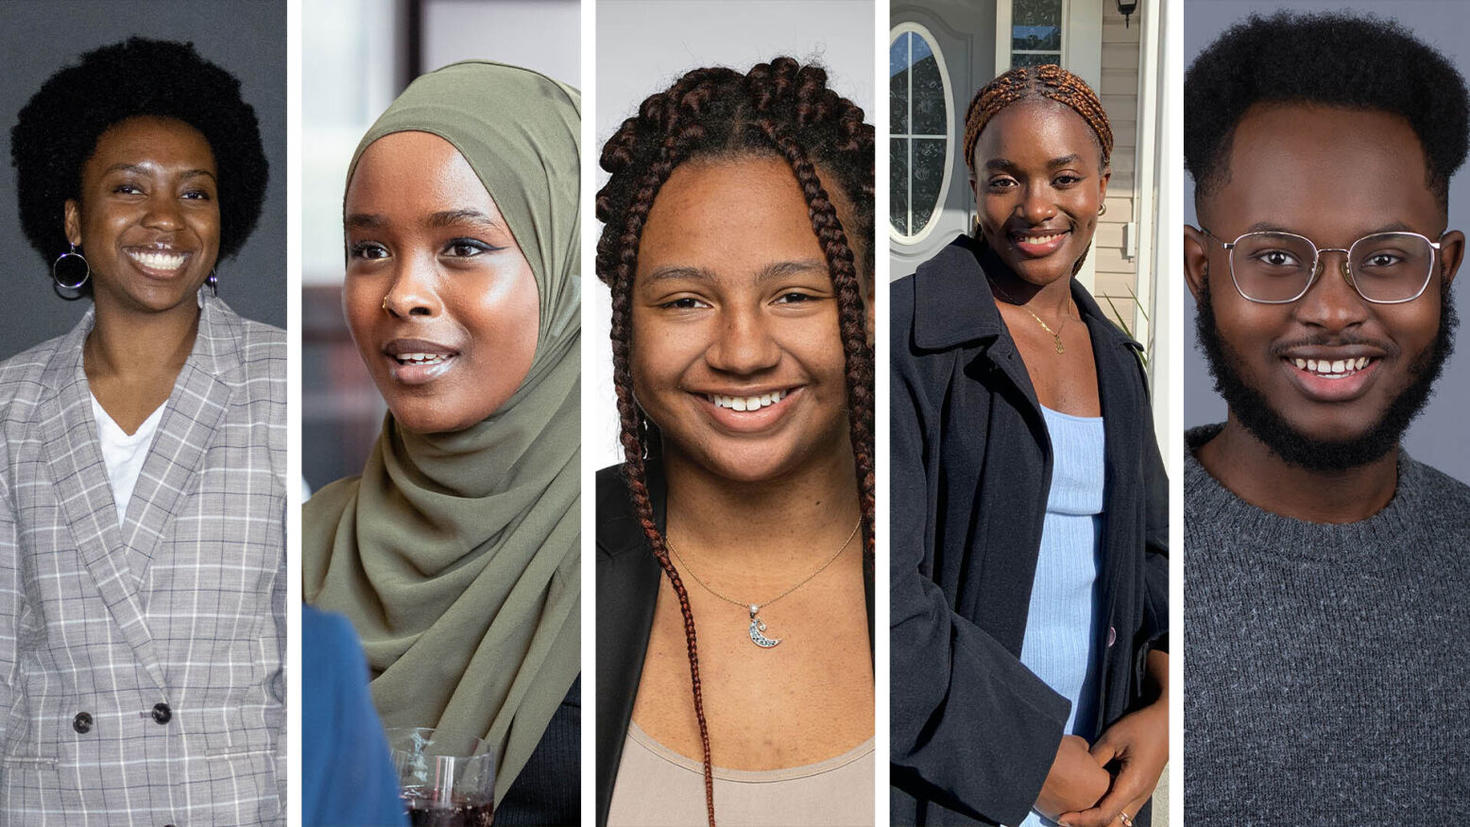 Collage of five black students featured in the article